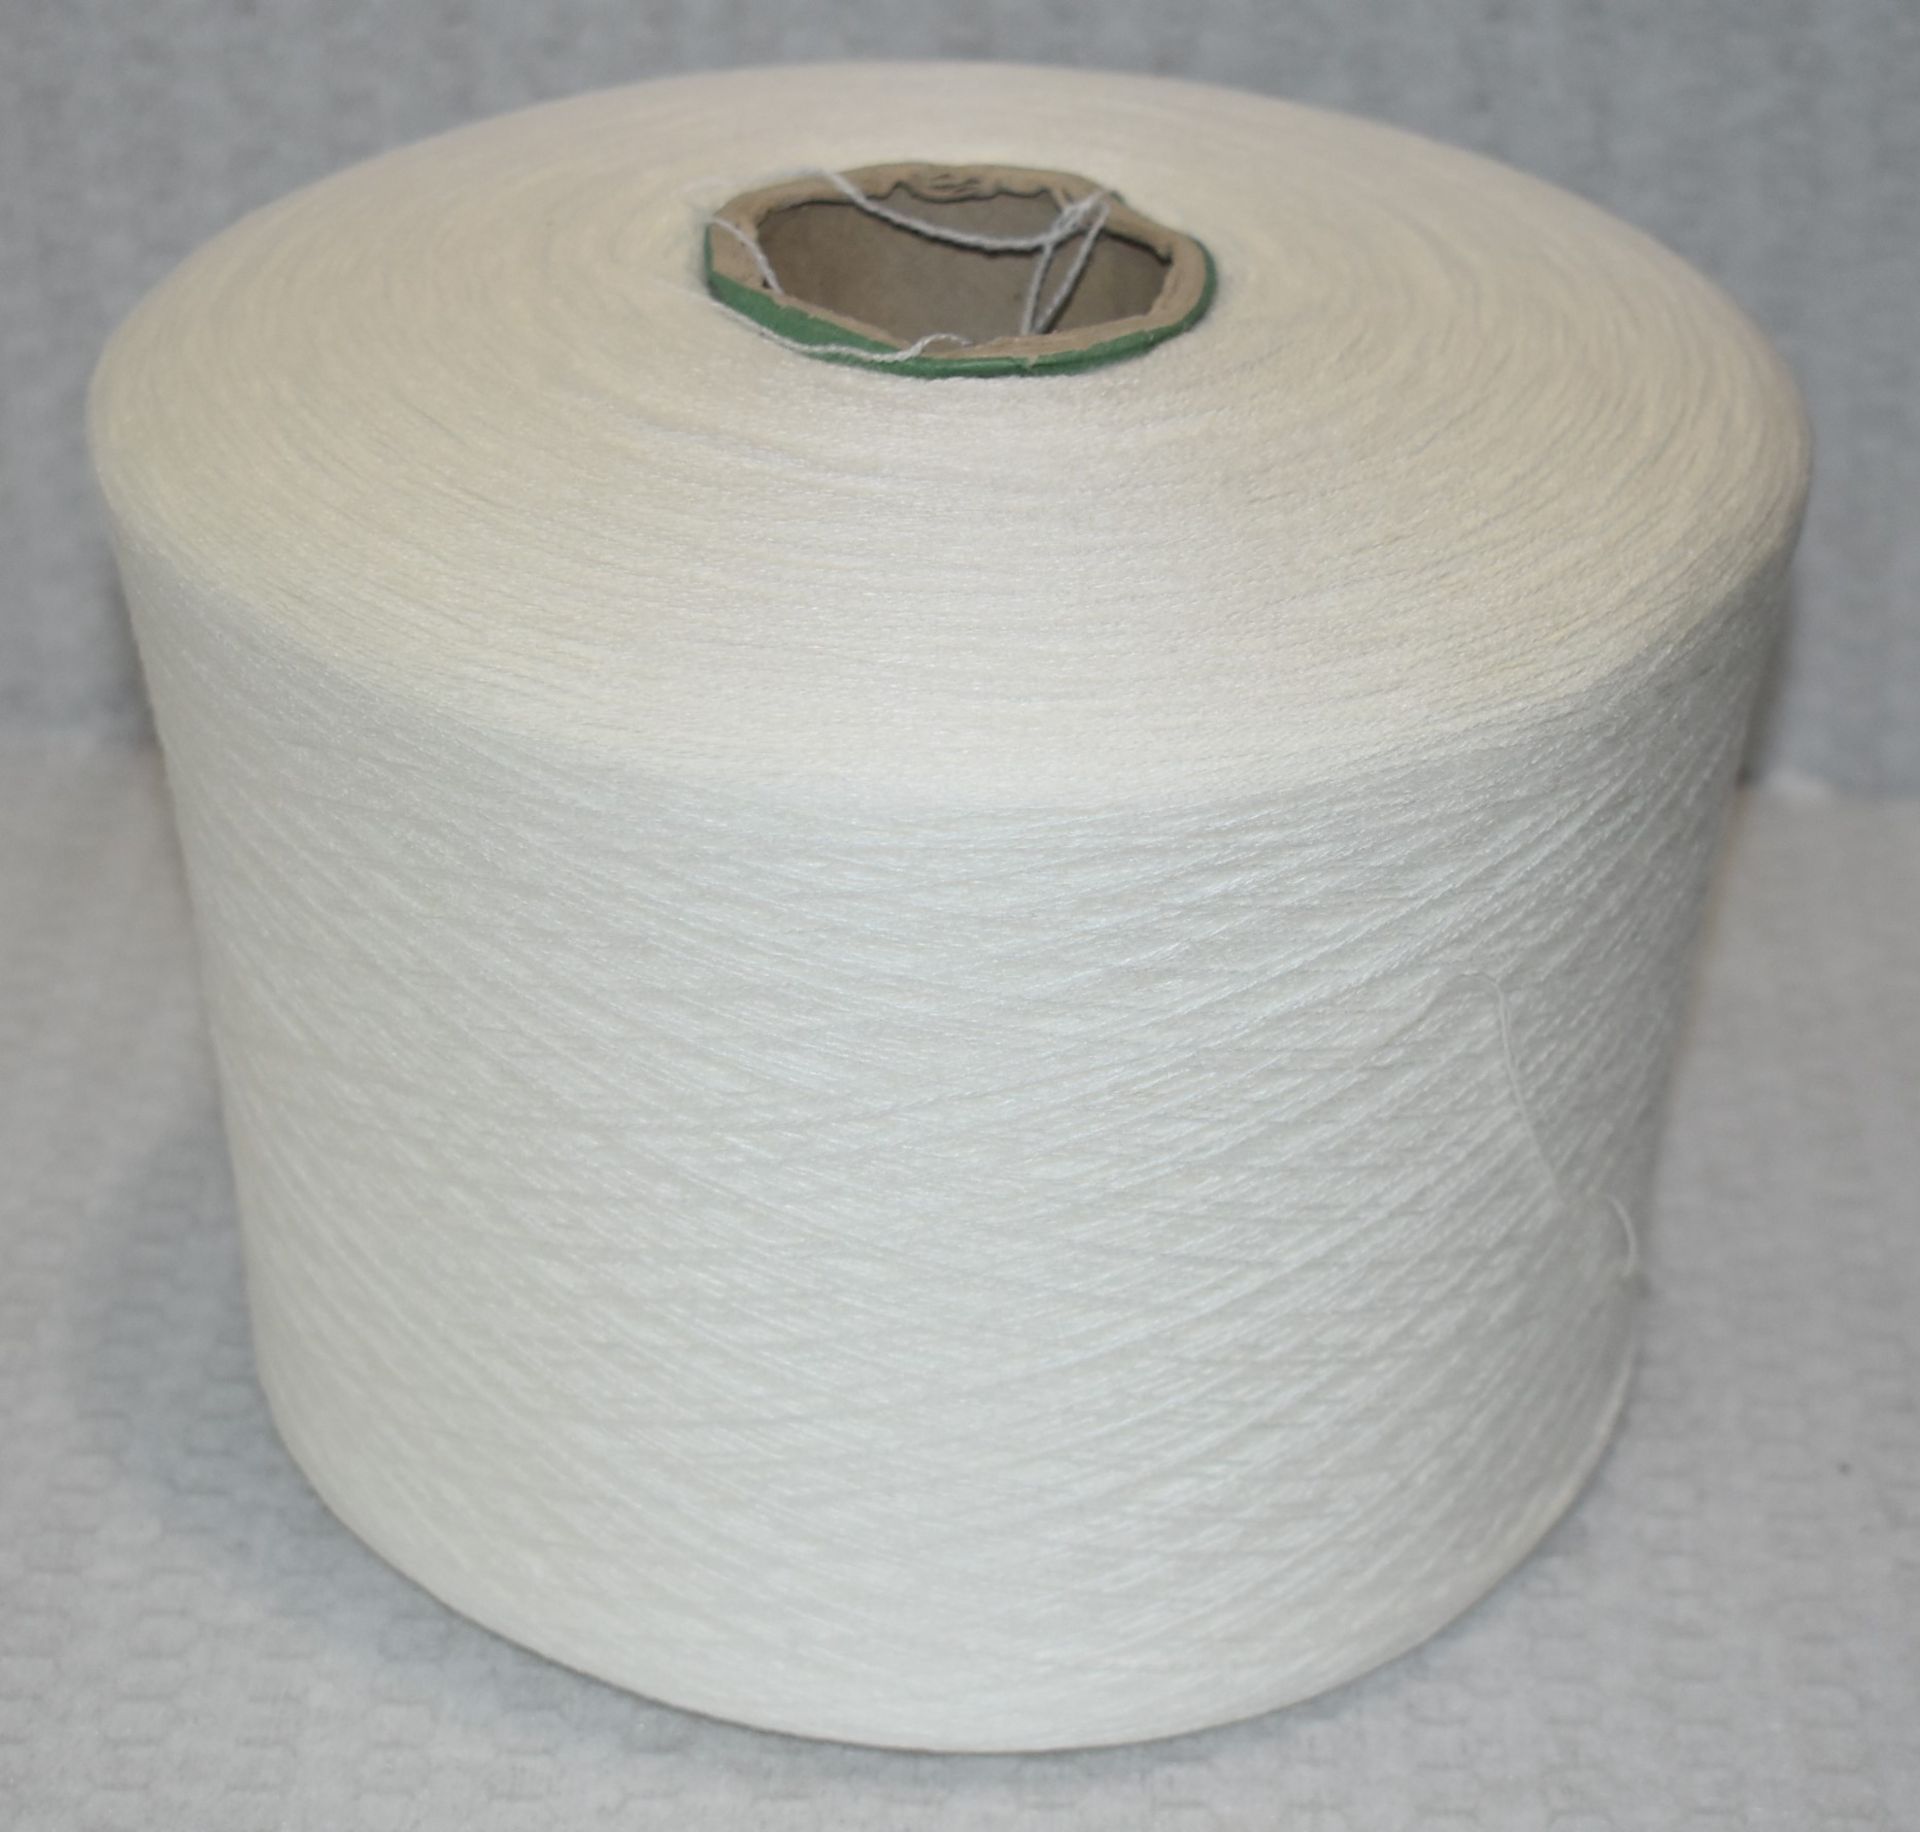 6 x Cones of 28/2 H.B 100% Acrylic Knitting Yarn - Colour: Ivory - Approx Weight: 1,300g - New Stock - Image 5 of 10